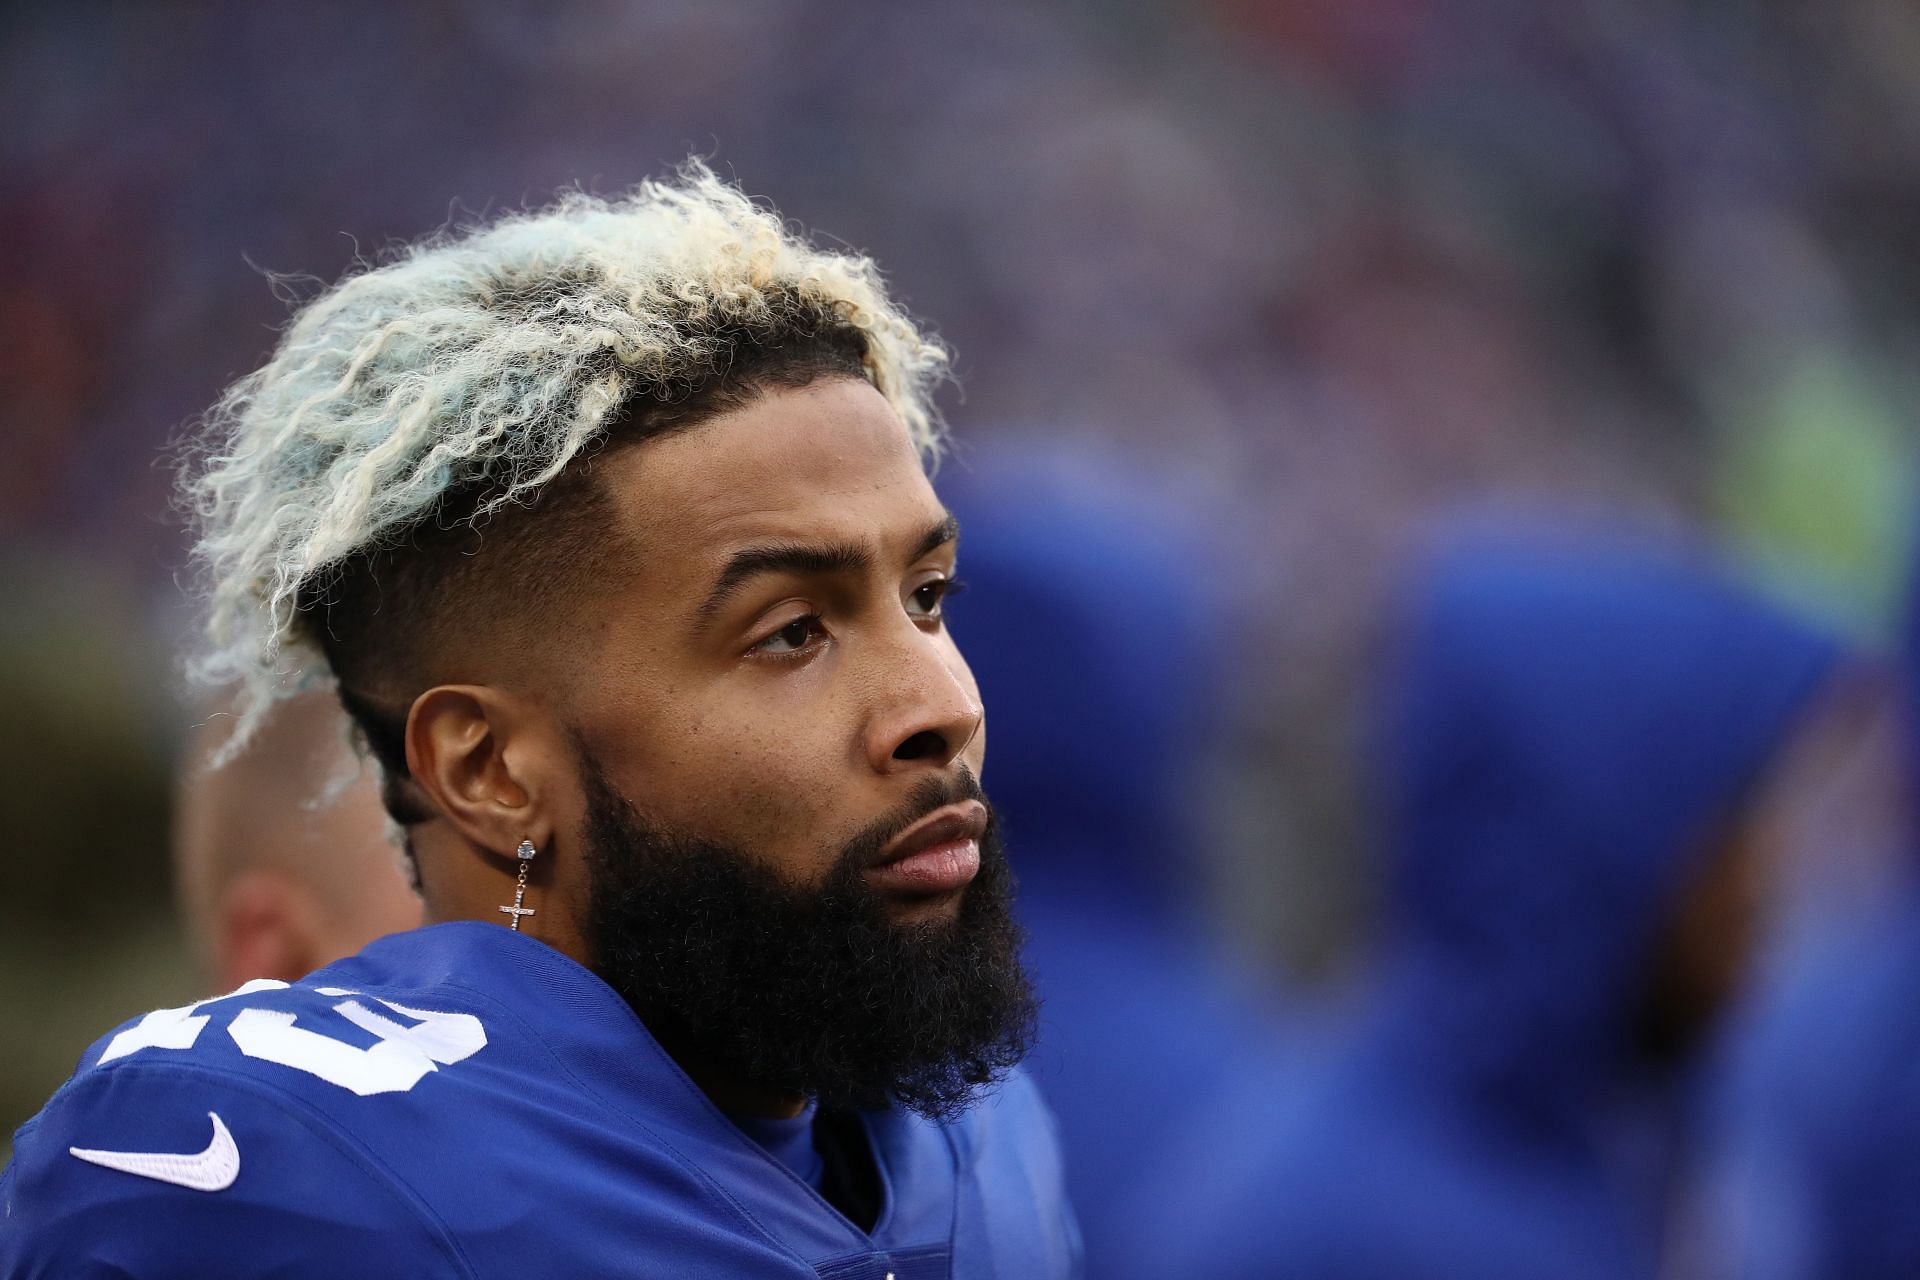 Could Odell Beckham Jr. reunite with the New York Giants?